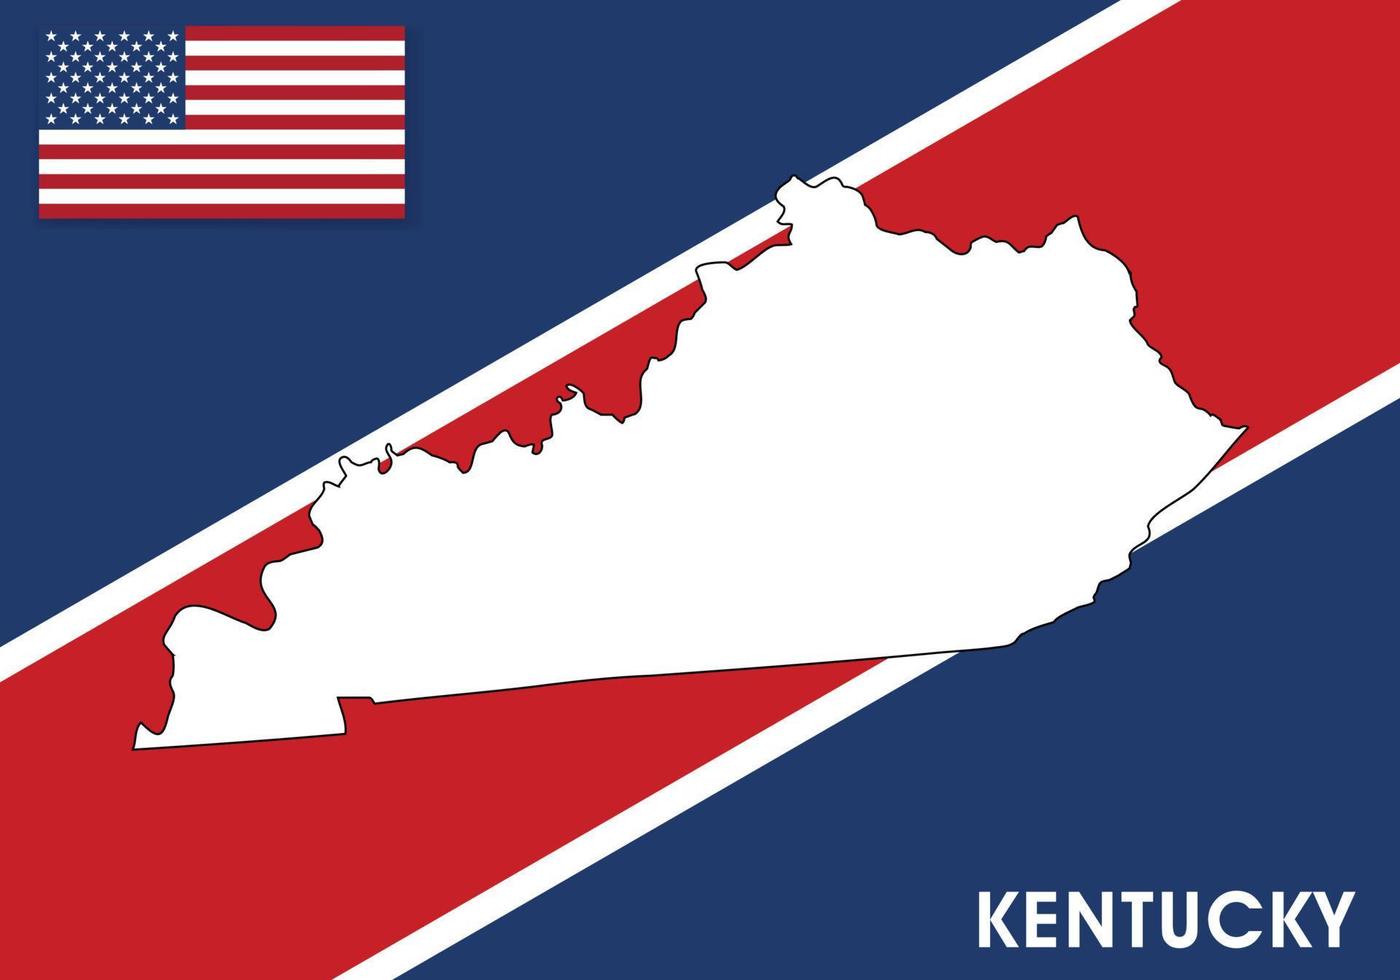 Kentucky - USA, United States of America Map vector template. white color map on flag background for design, infographic - Vector illustration eps 10